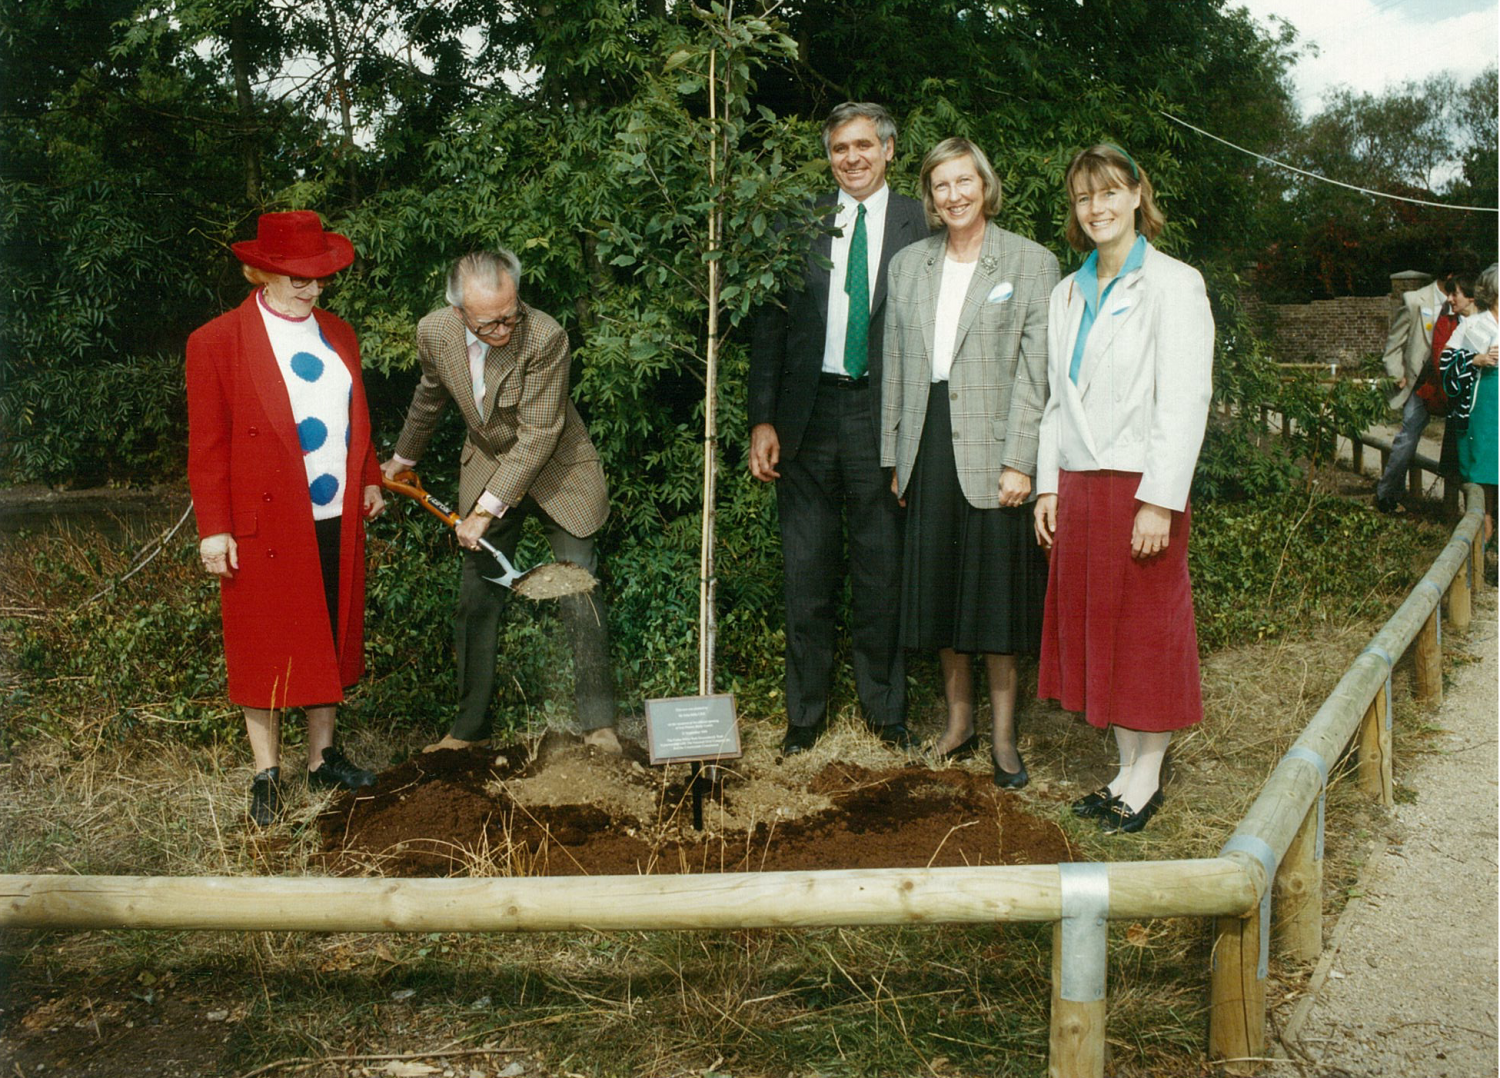 Sir Mills planting a commemorative tree at the opening of the centre on the 21st of September 1990.